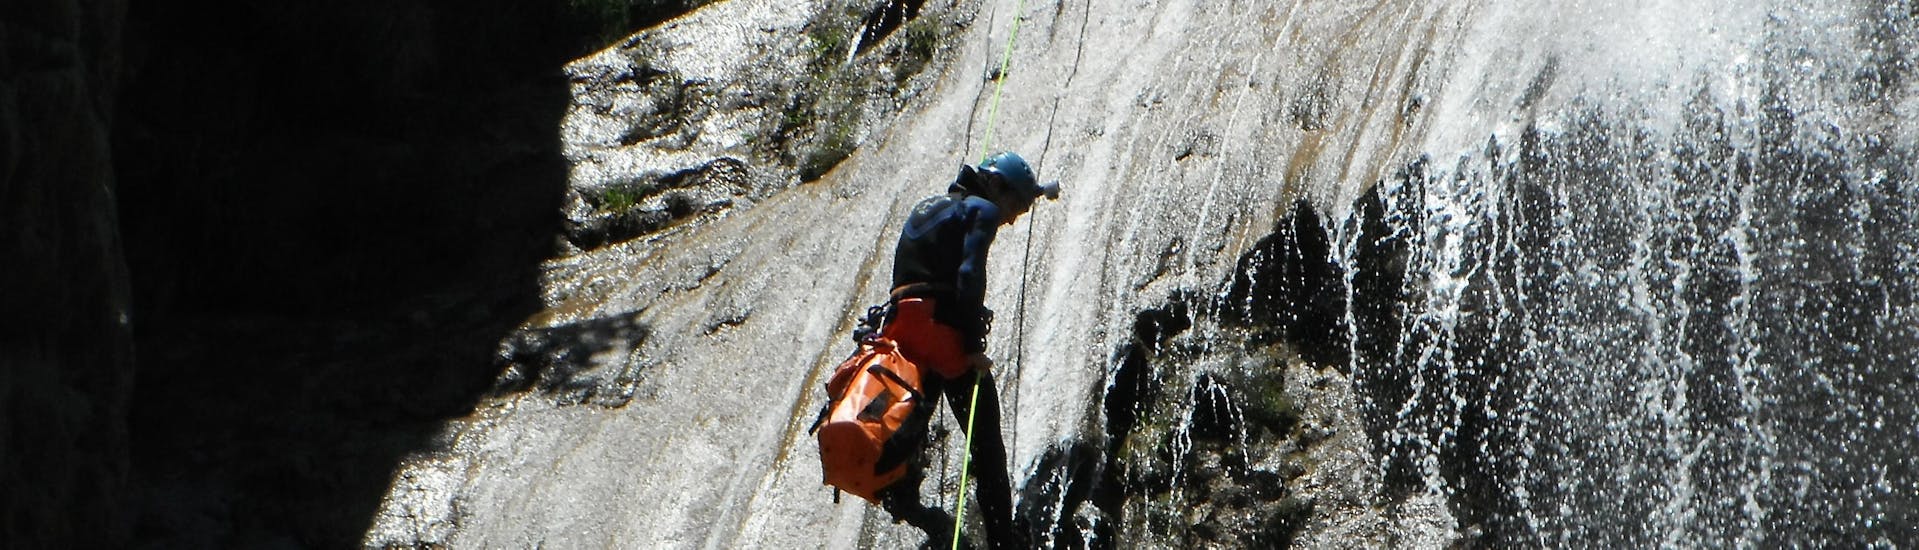 Canyoning in the Nissod for Experts.